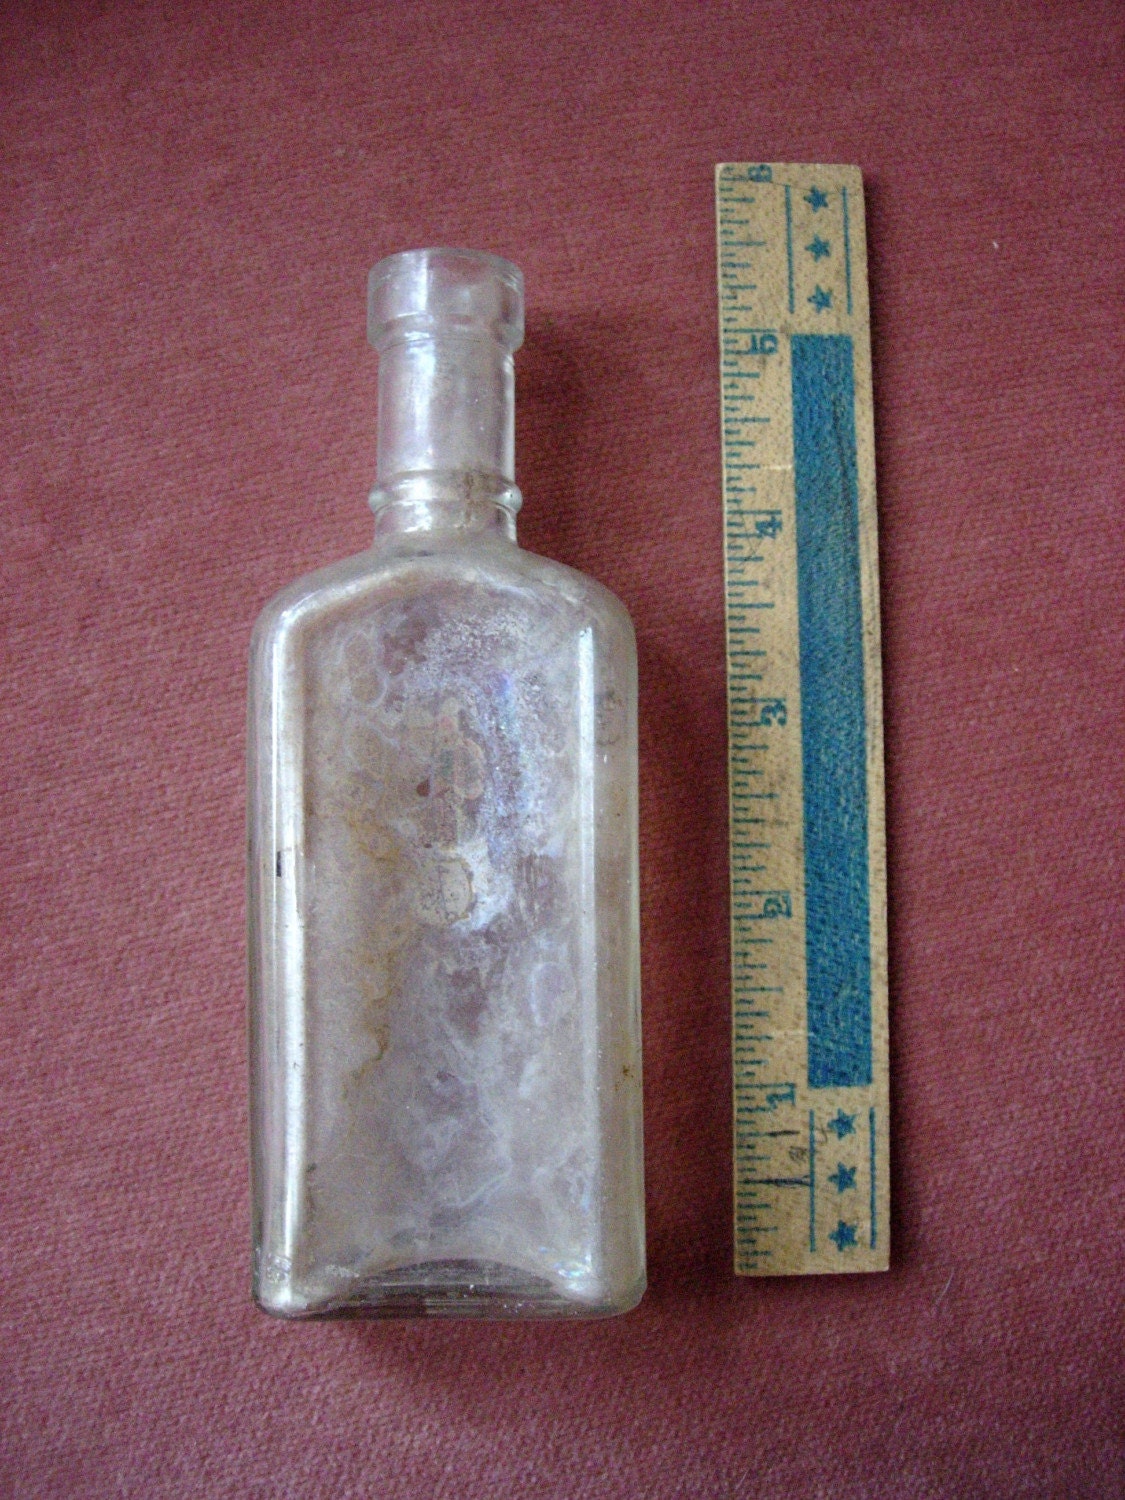 Download Very old clear glass bottle small made for a cork